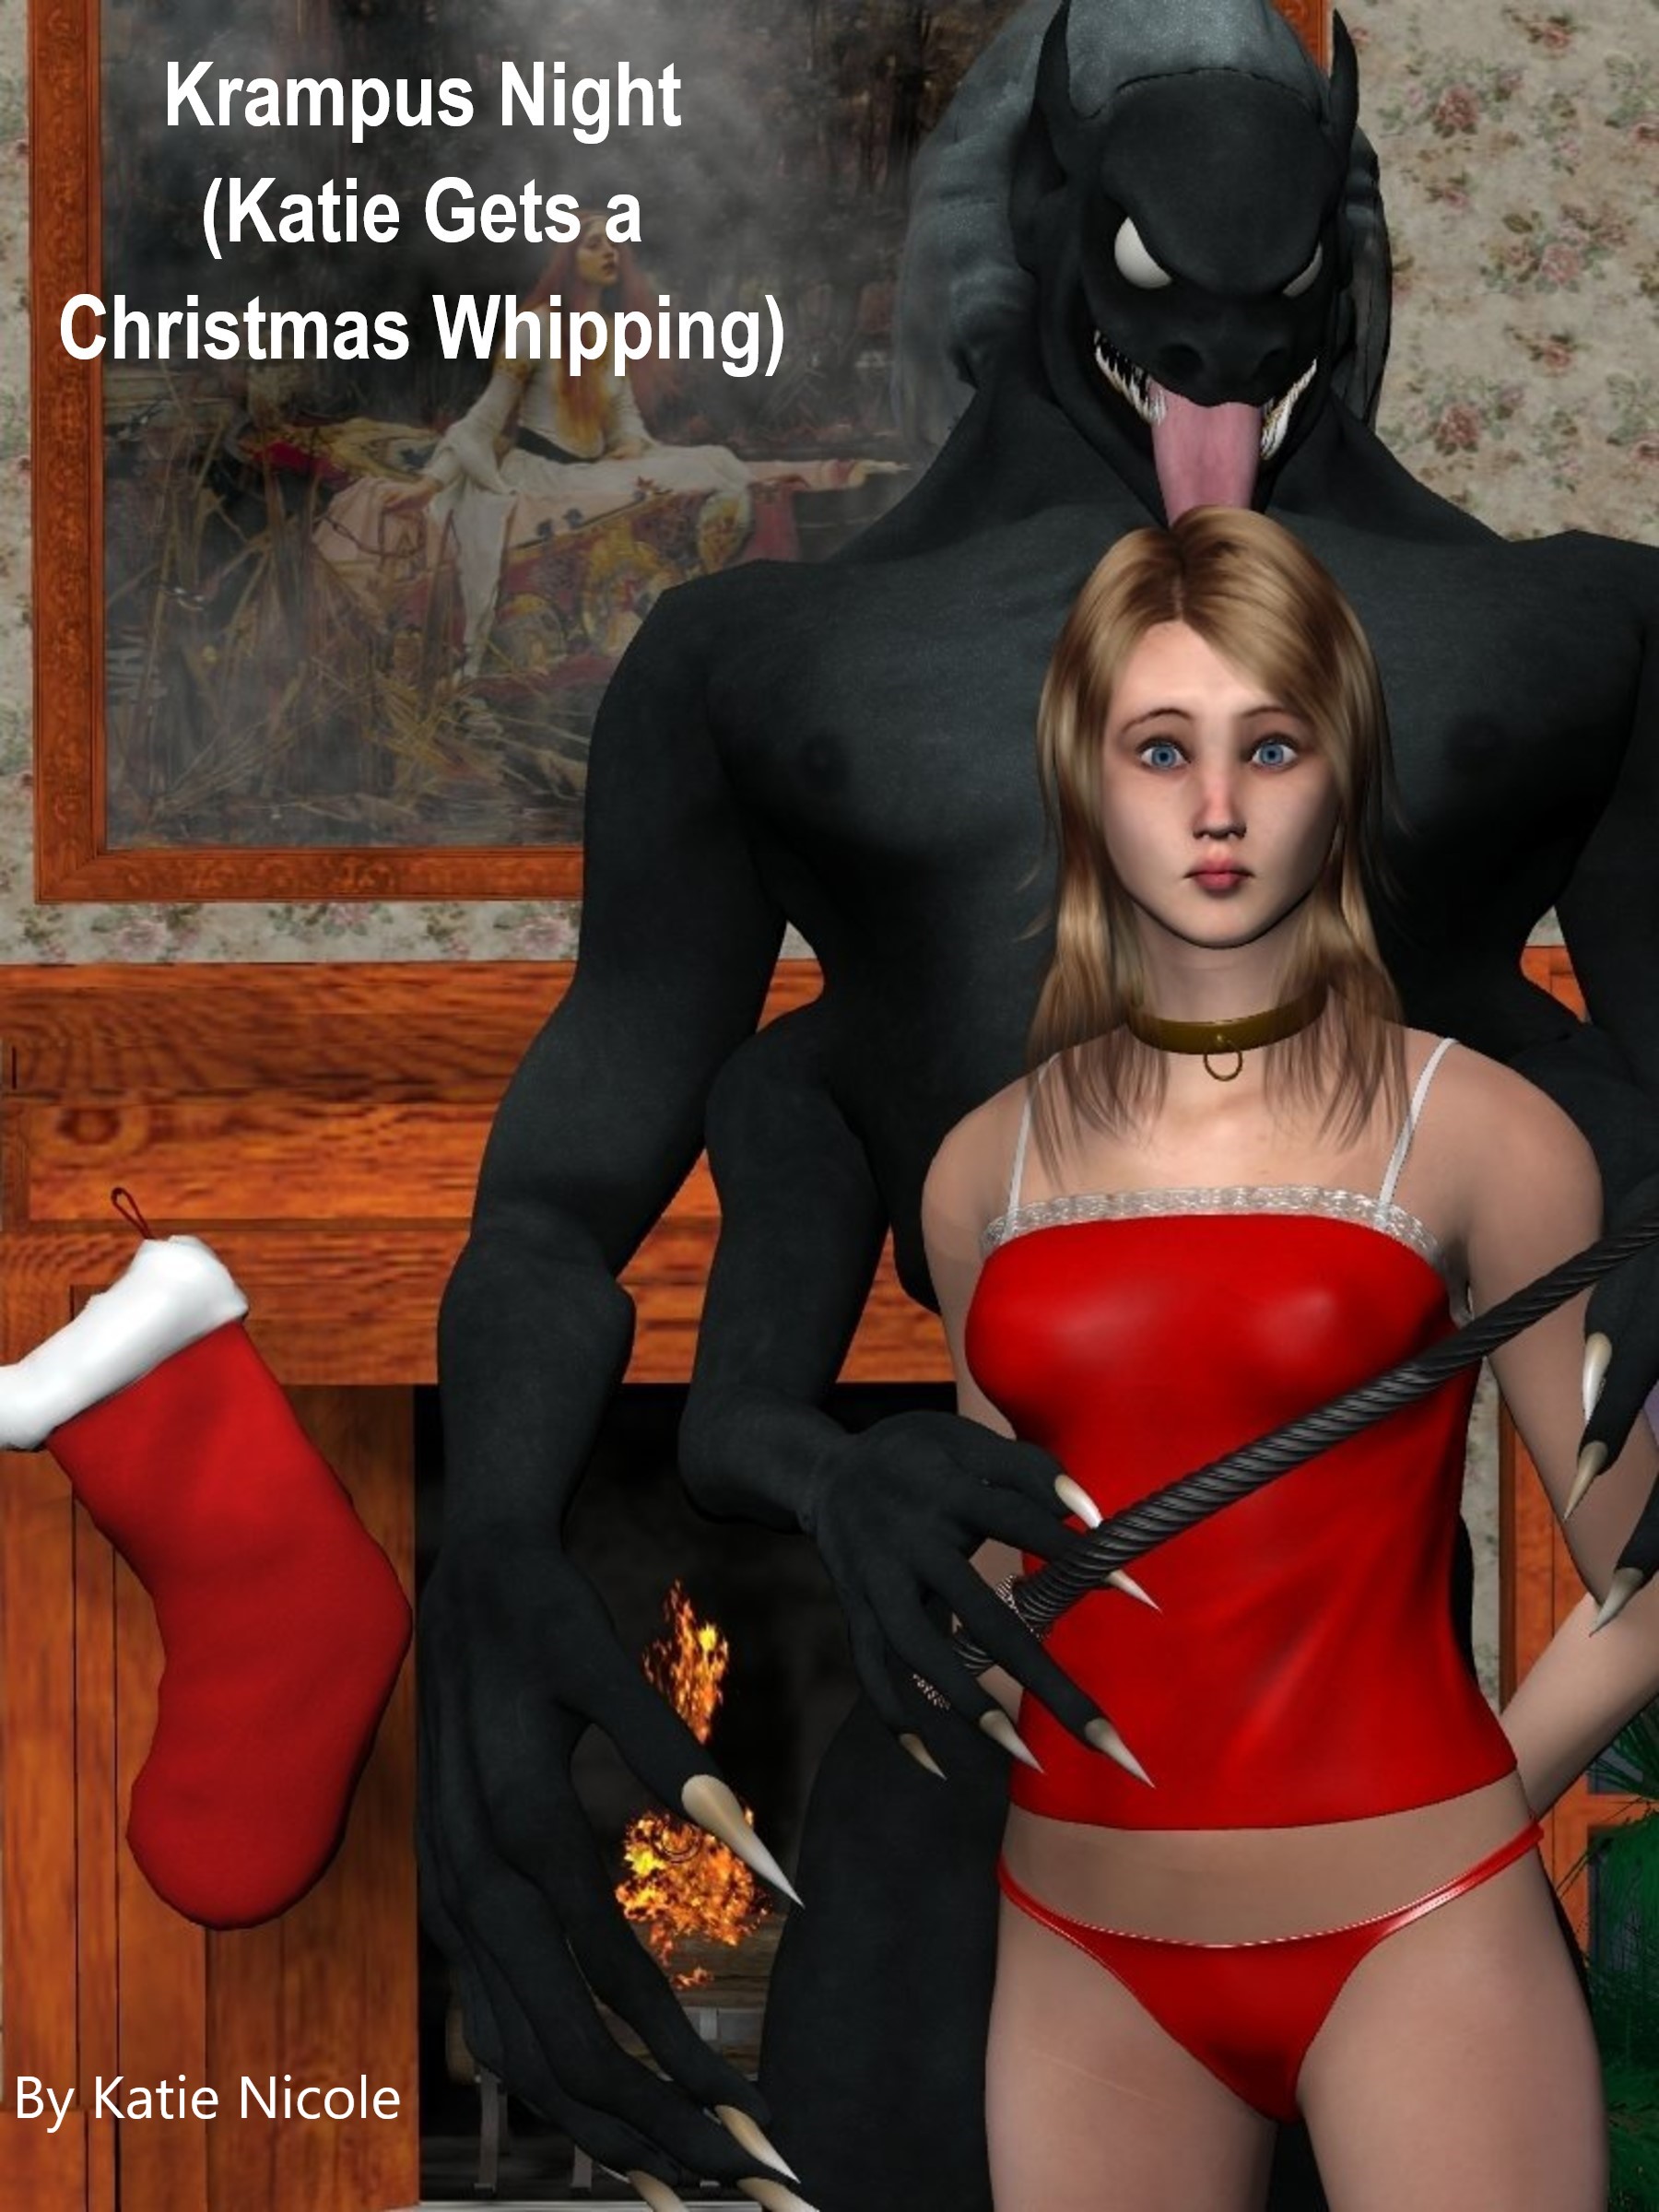 Christmas Bdsm Porn - Krampus Night (Katie Gets a Christmas Whipping), an Ebook by Katie Nicole